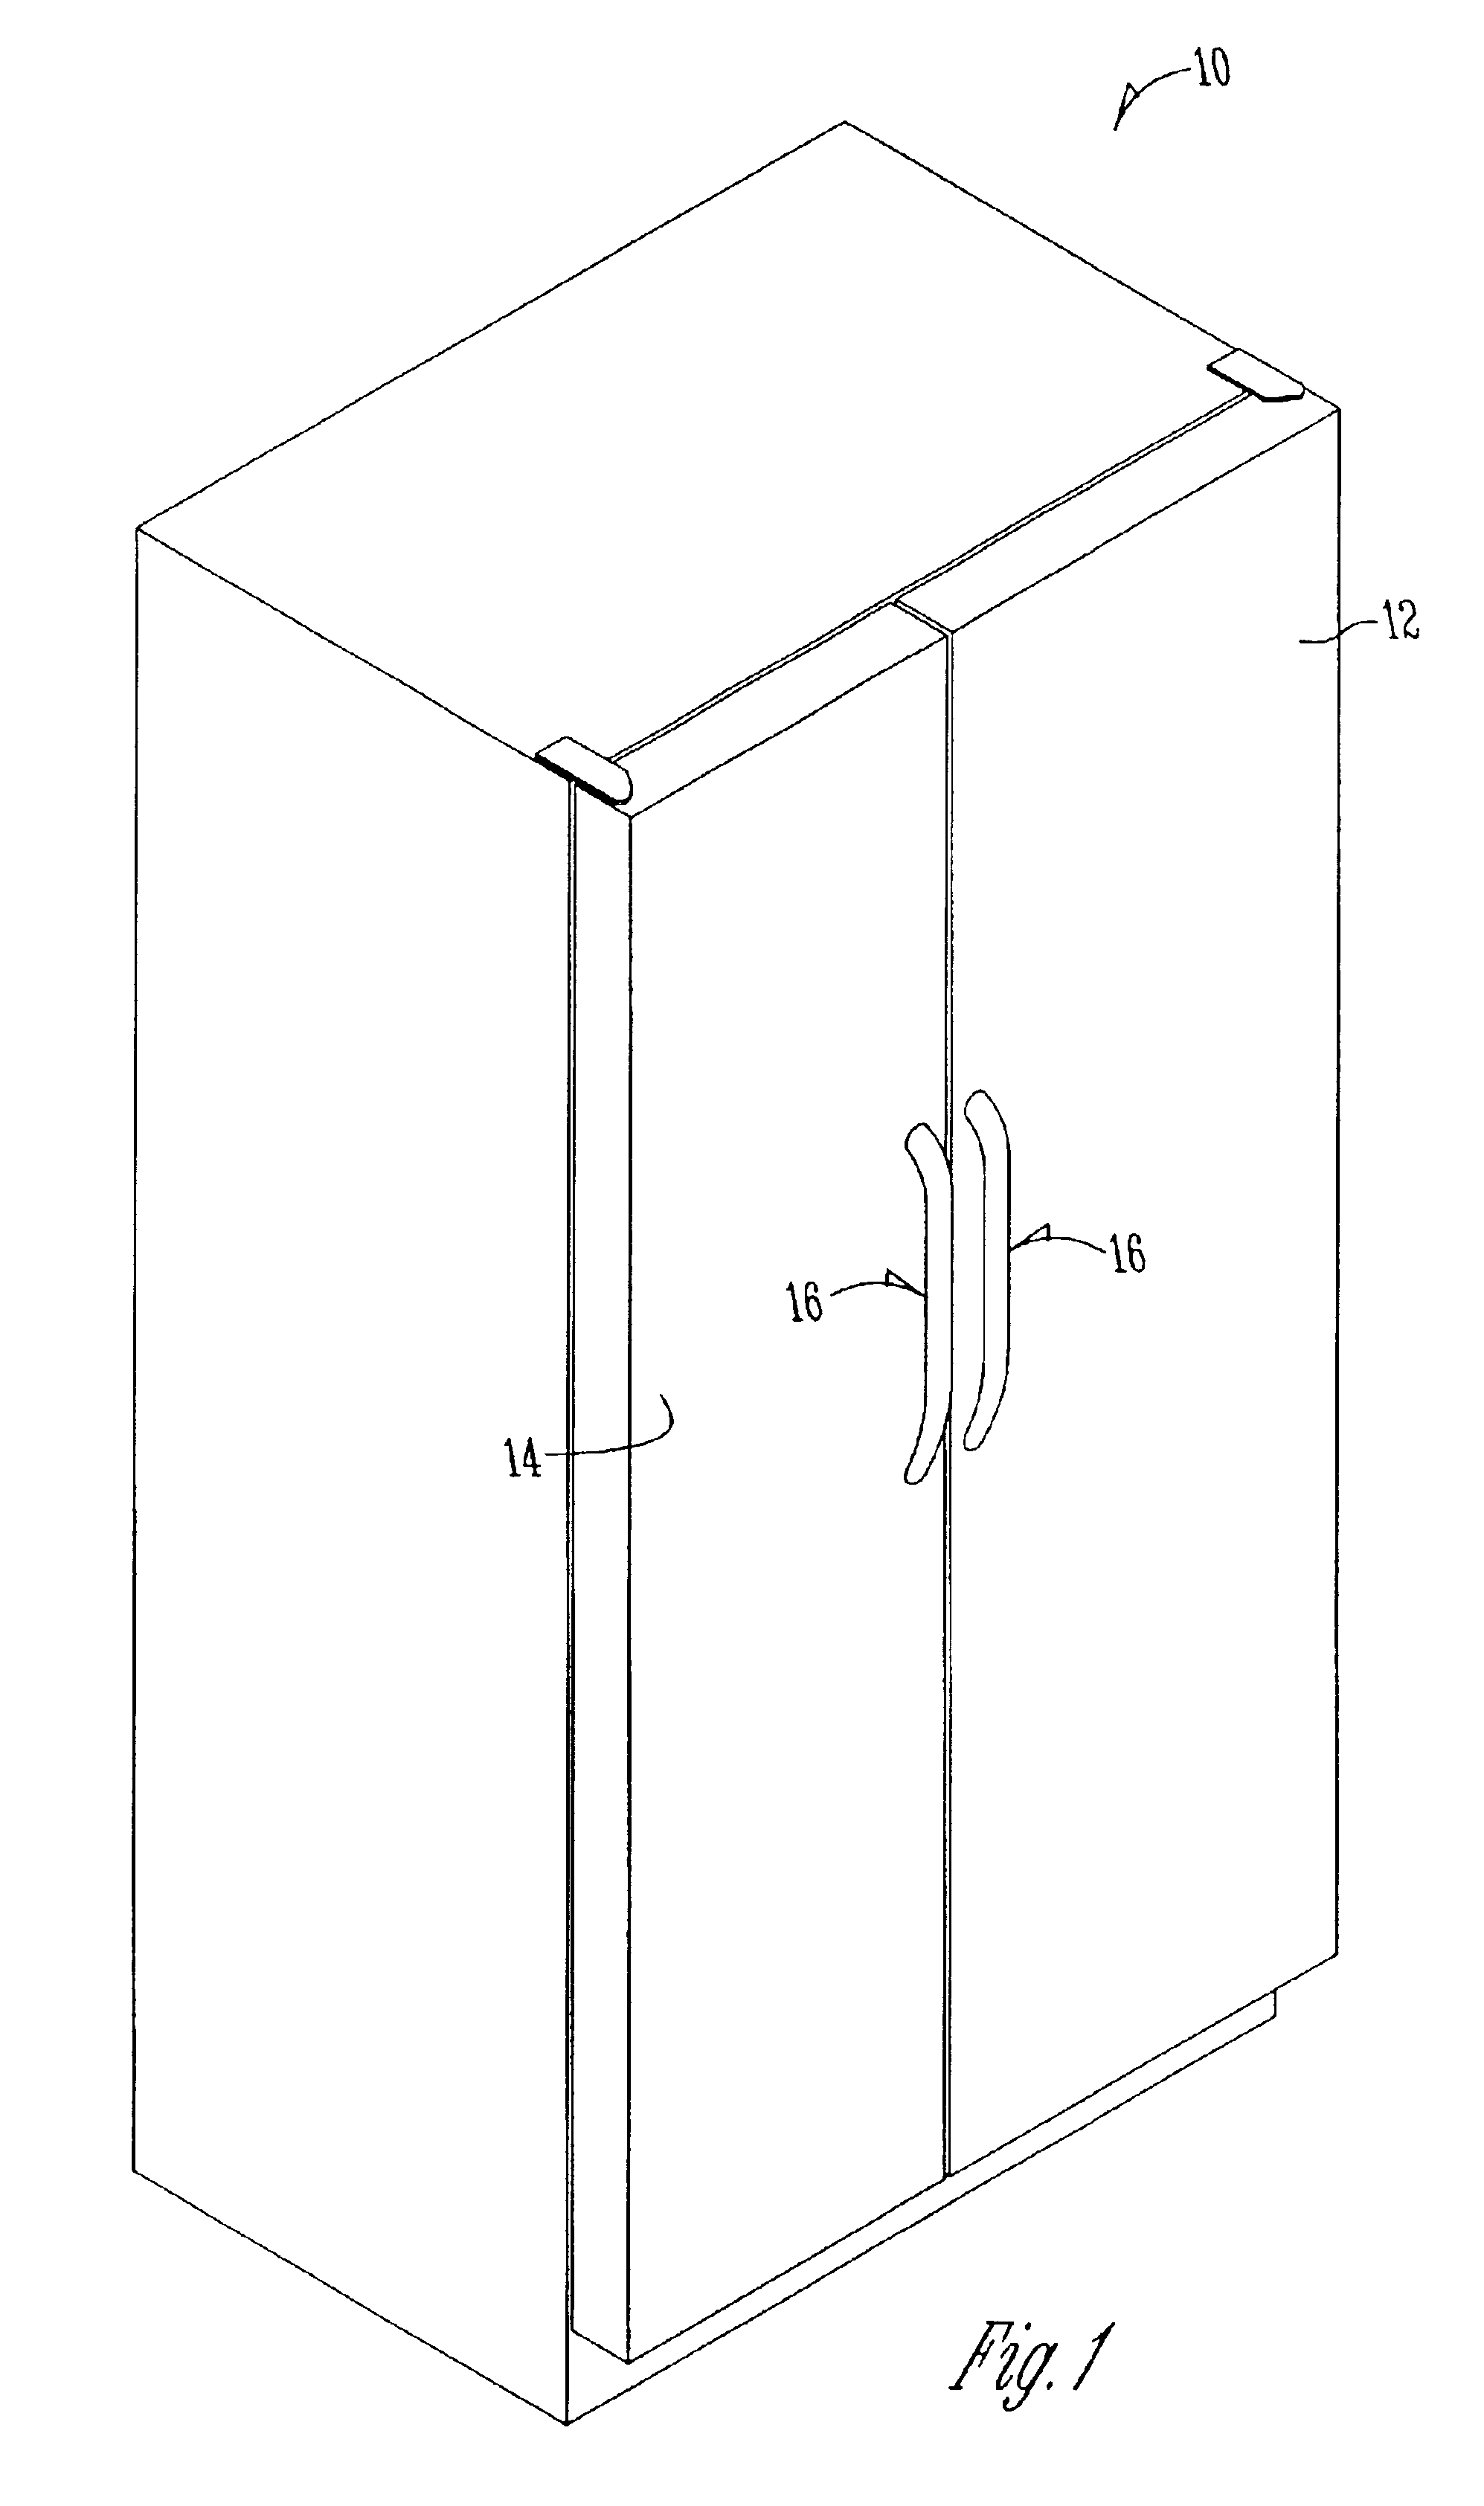 Apparatus, method and device for attaching hydroformed handle to an appliance